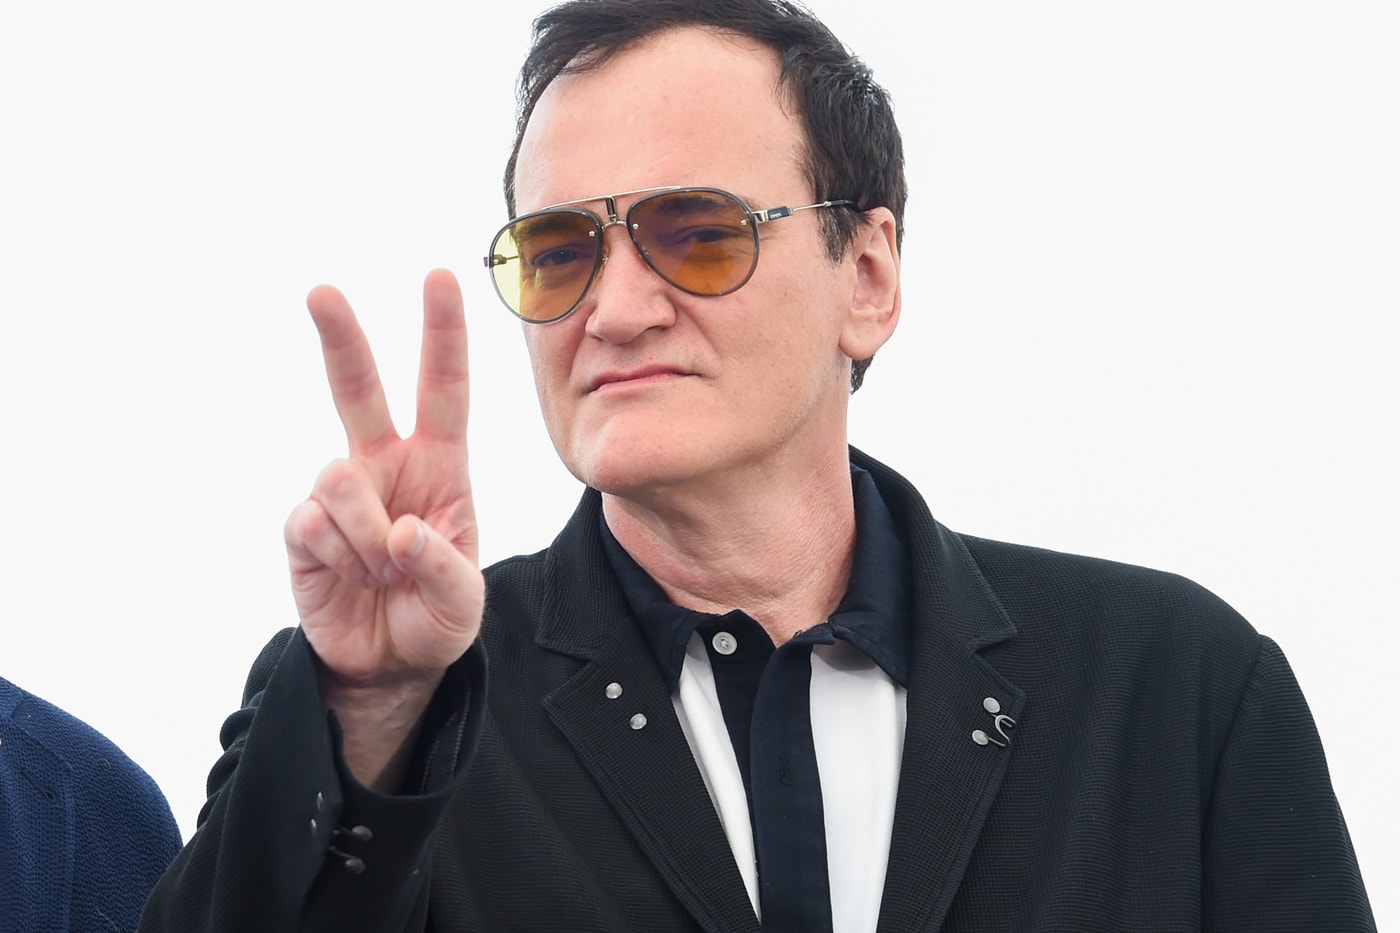 Quentin Tarantino Curates Spotify Movie Playlist nancy sinatra johnny cash the white stripes chuck berry pulp fiction inglorious basterds kill billtonce up